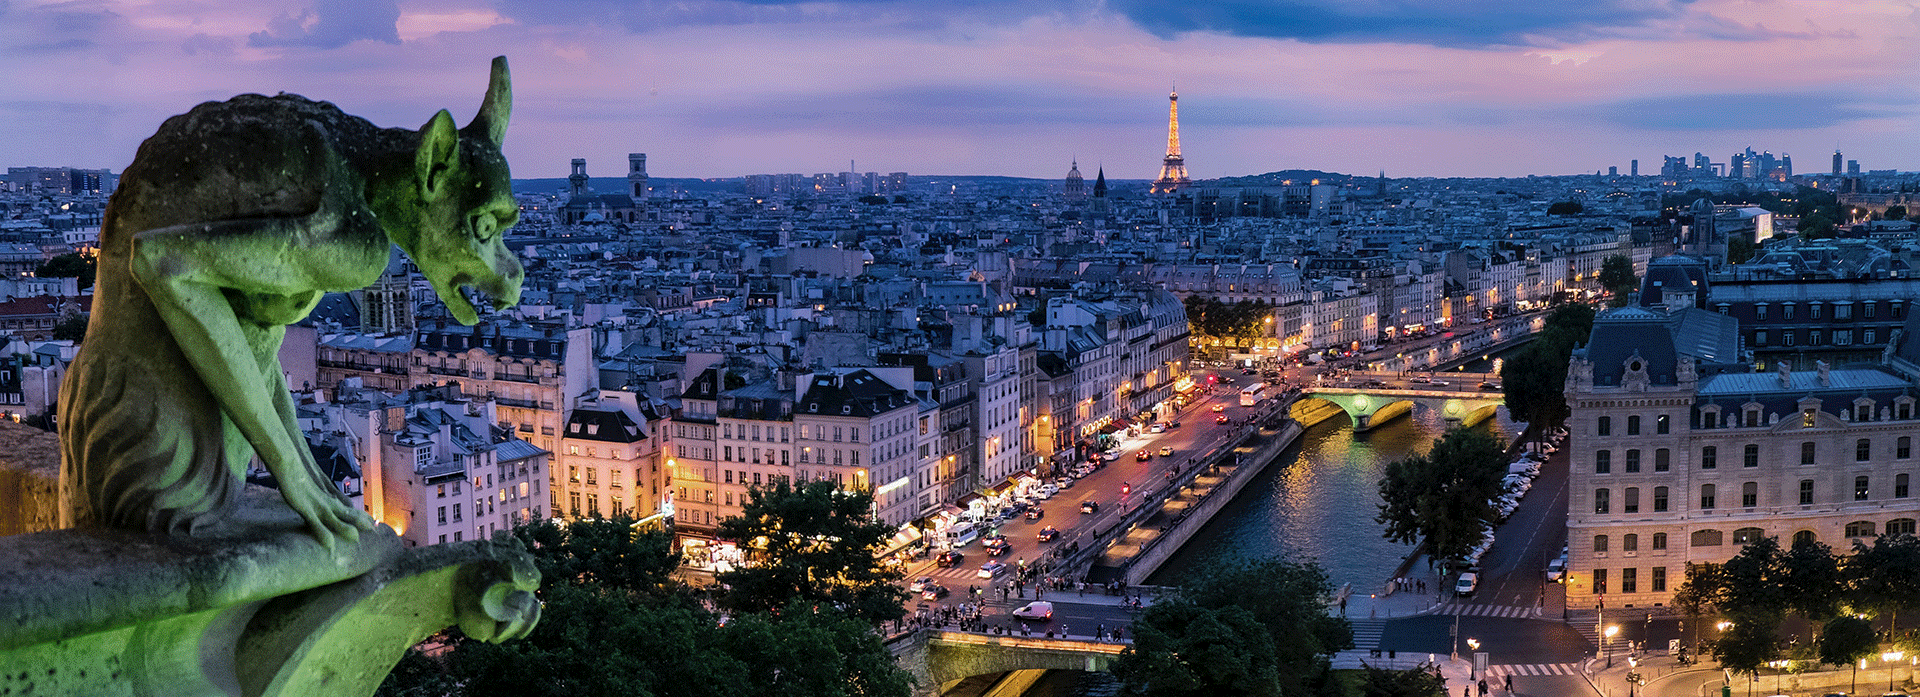 Next to the gargoyles, a high vantage point view of Paris with a purple sky